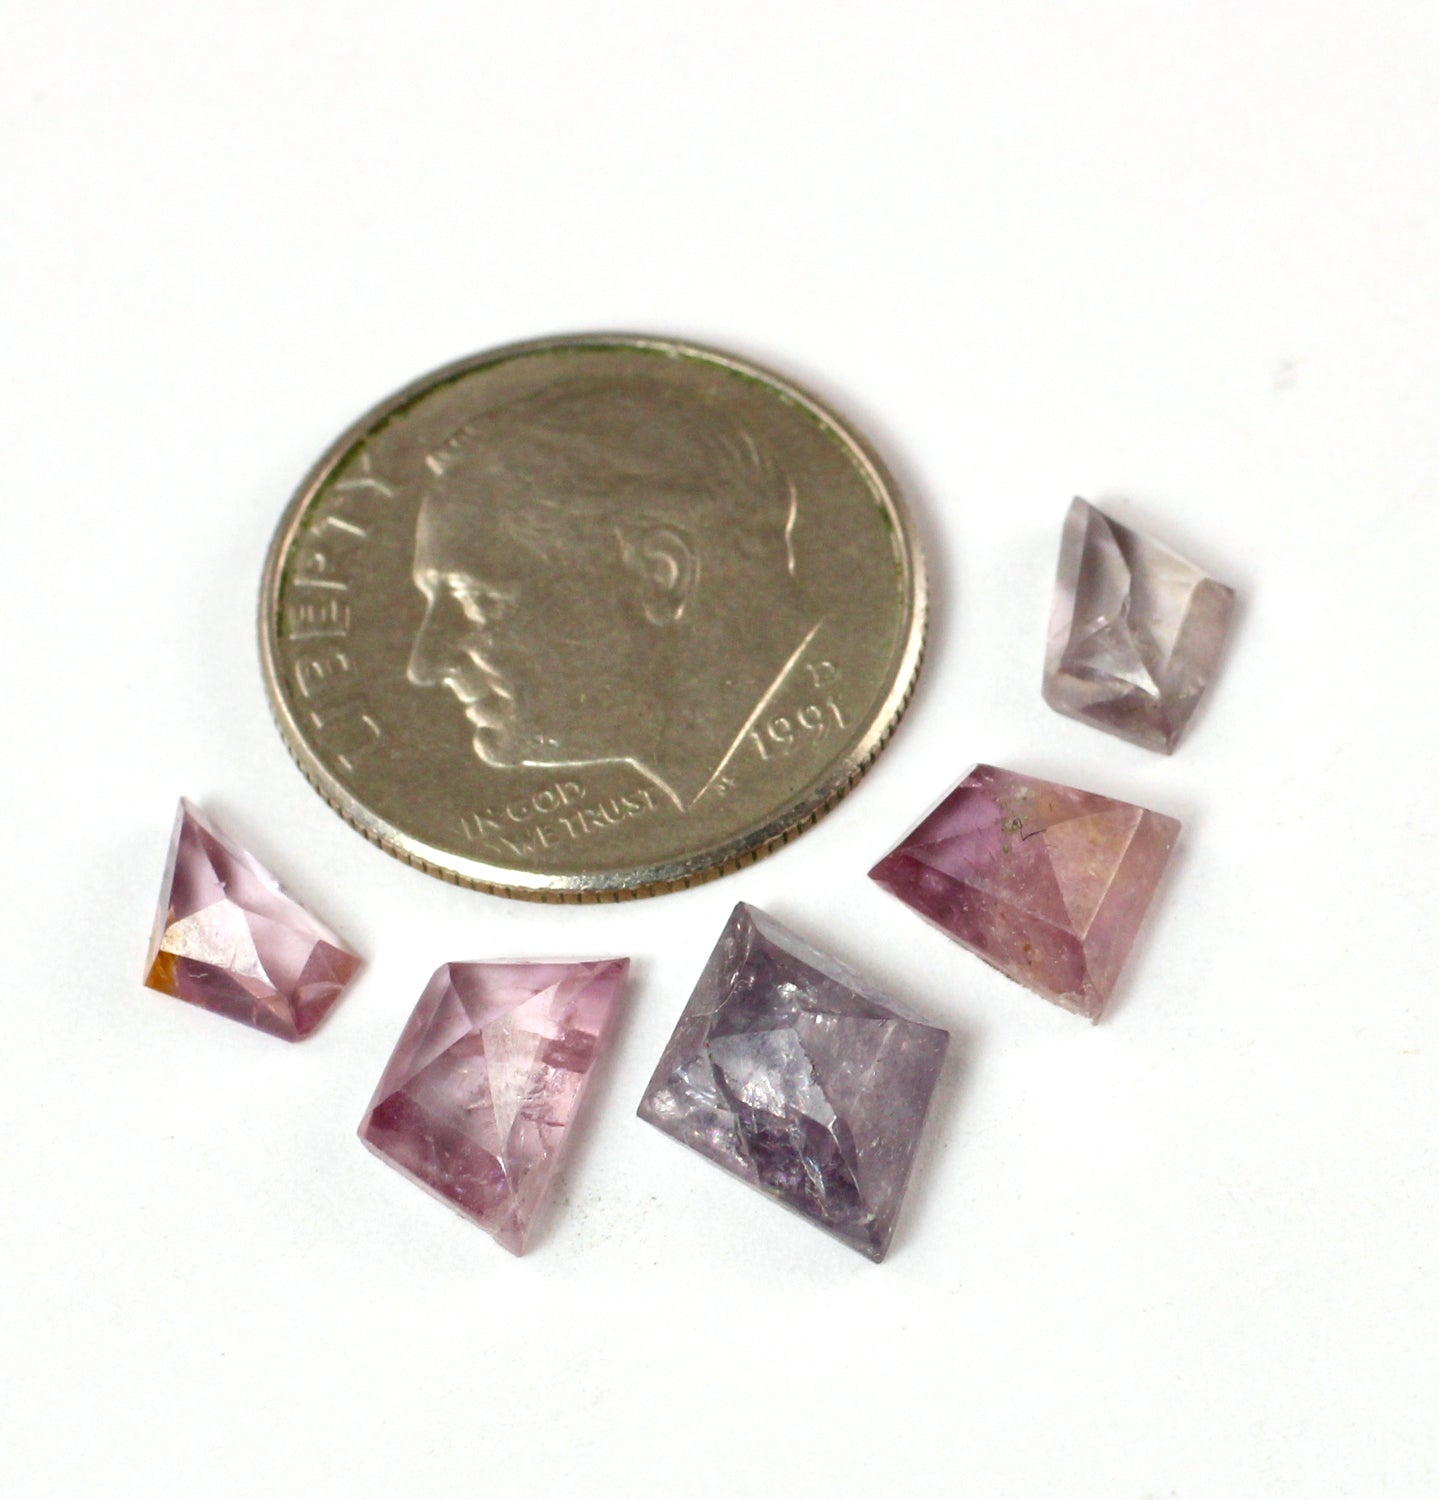 Spinel Collection - Lot 6